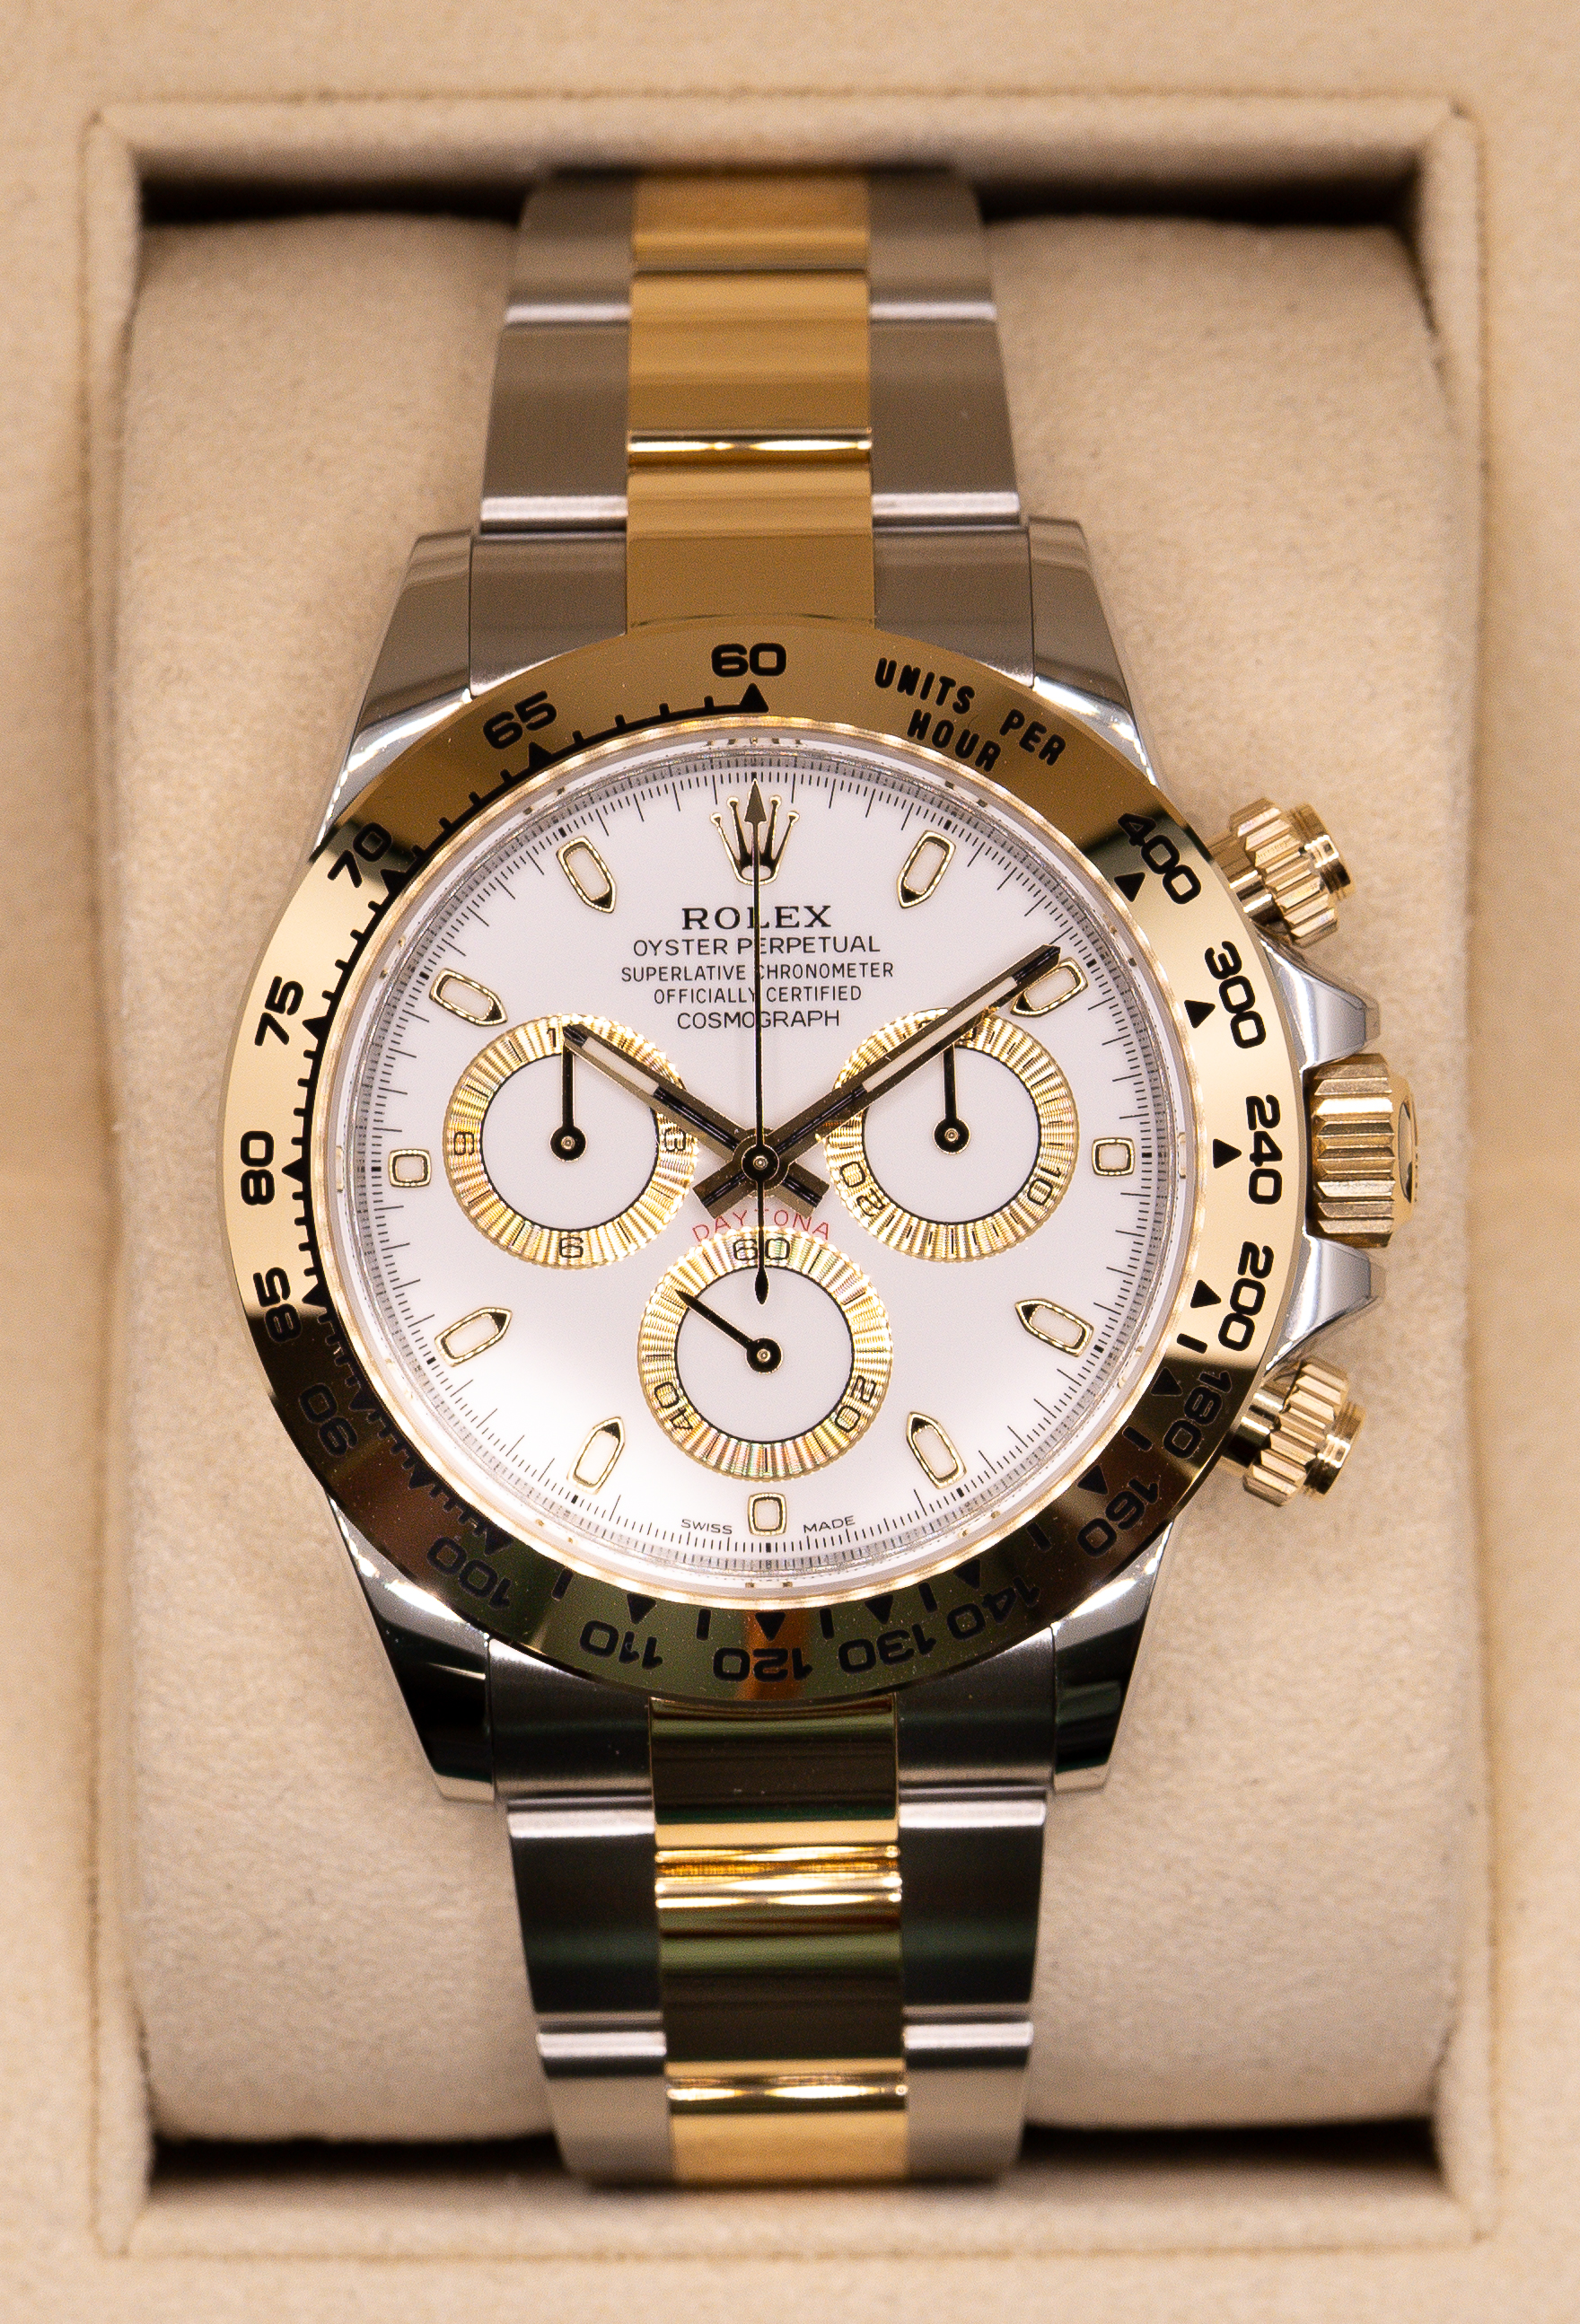 TopNotch Watch has many different Rolex watches available to those in Illinis